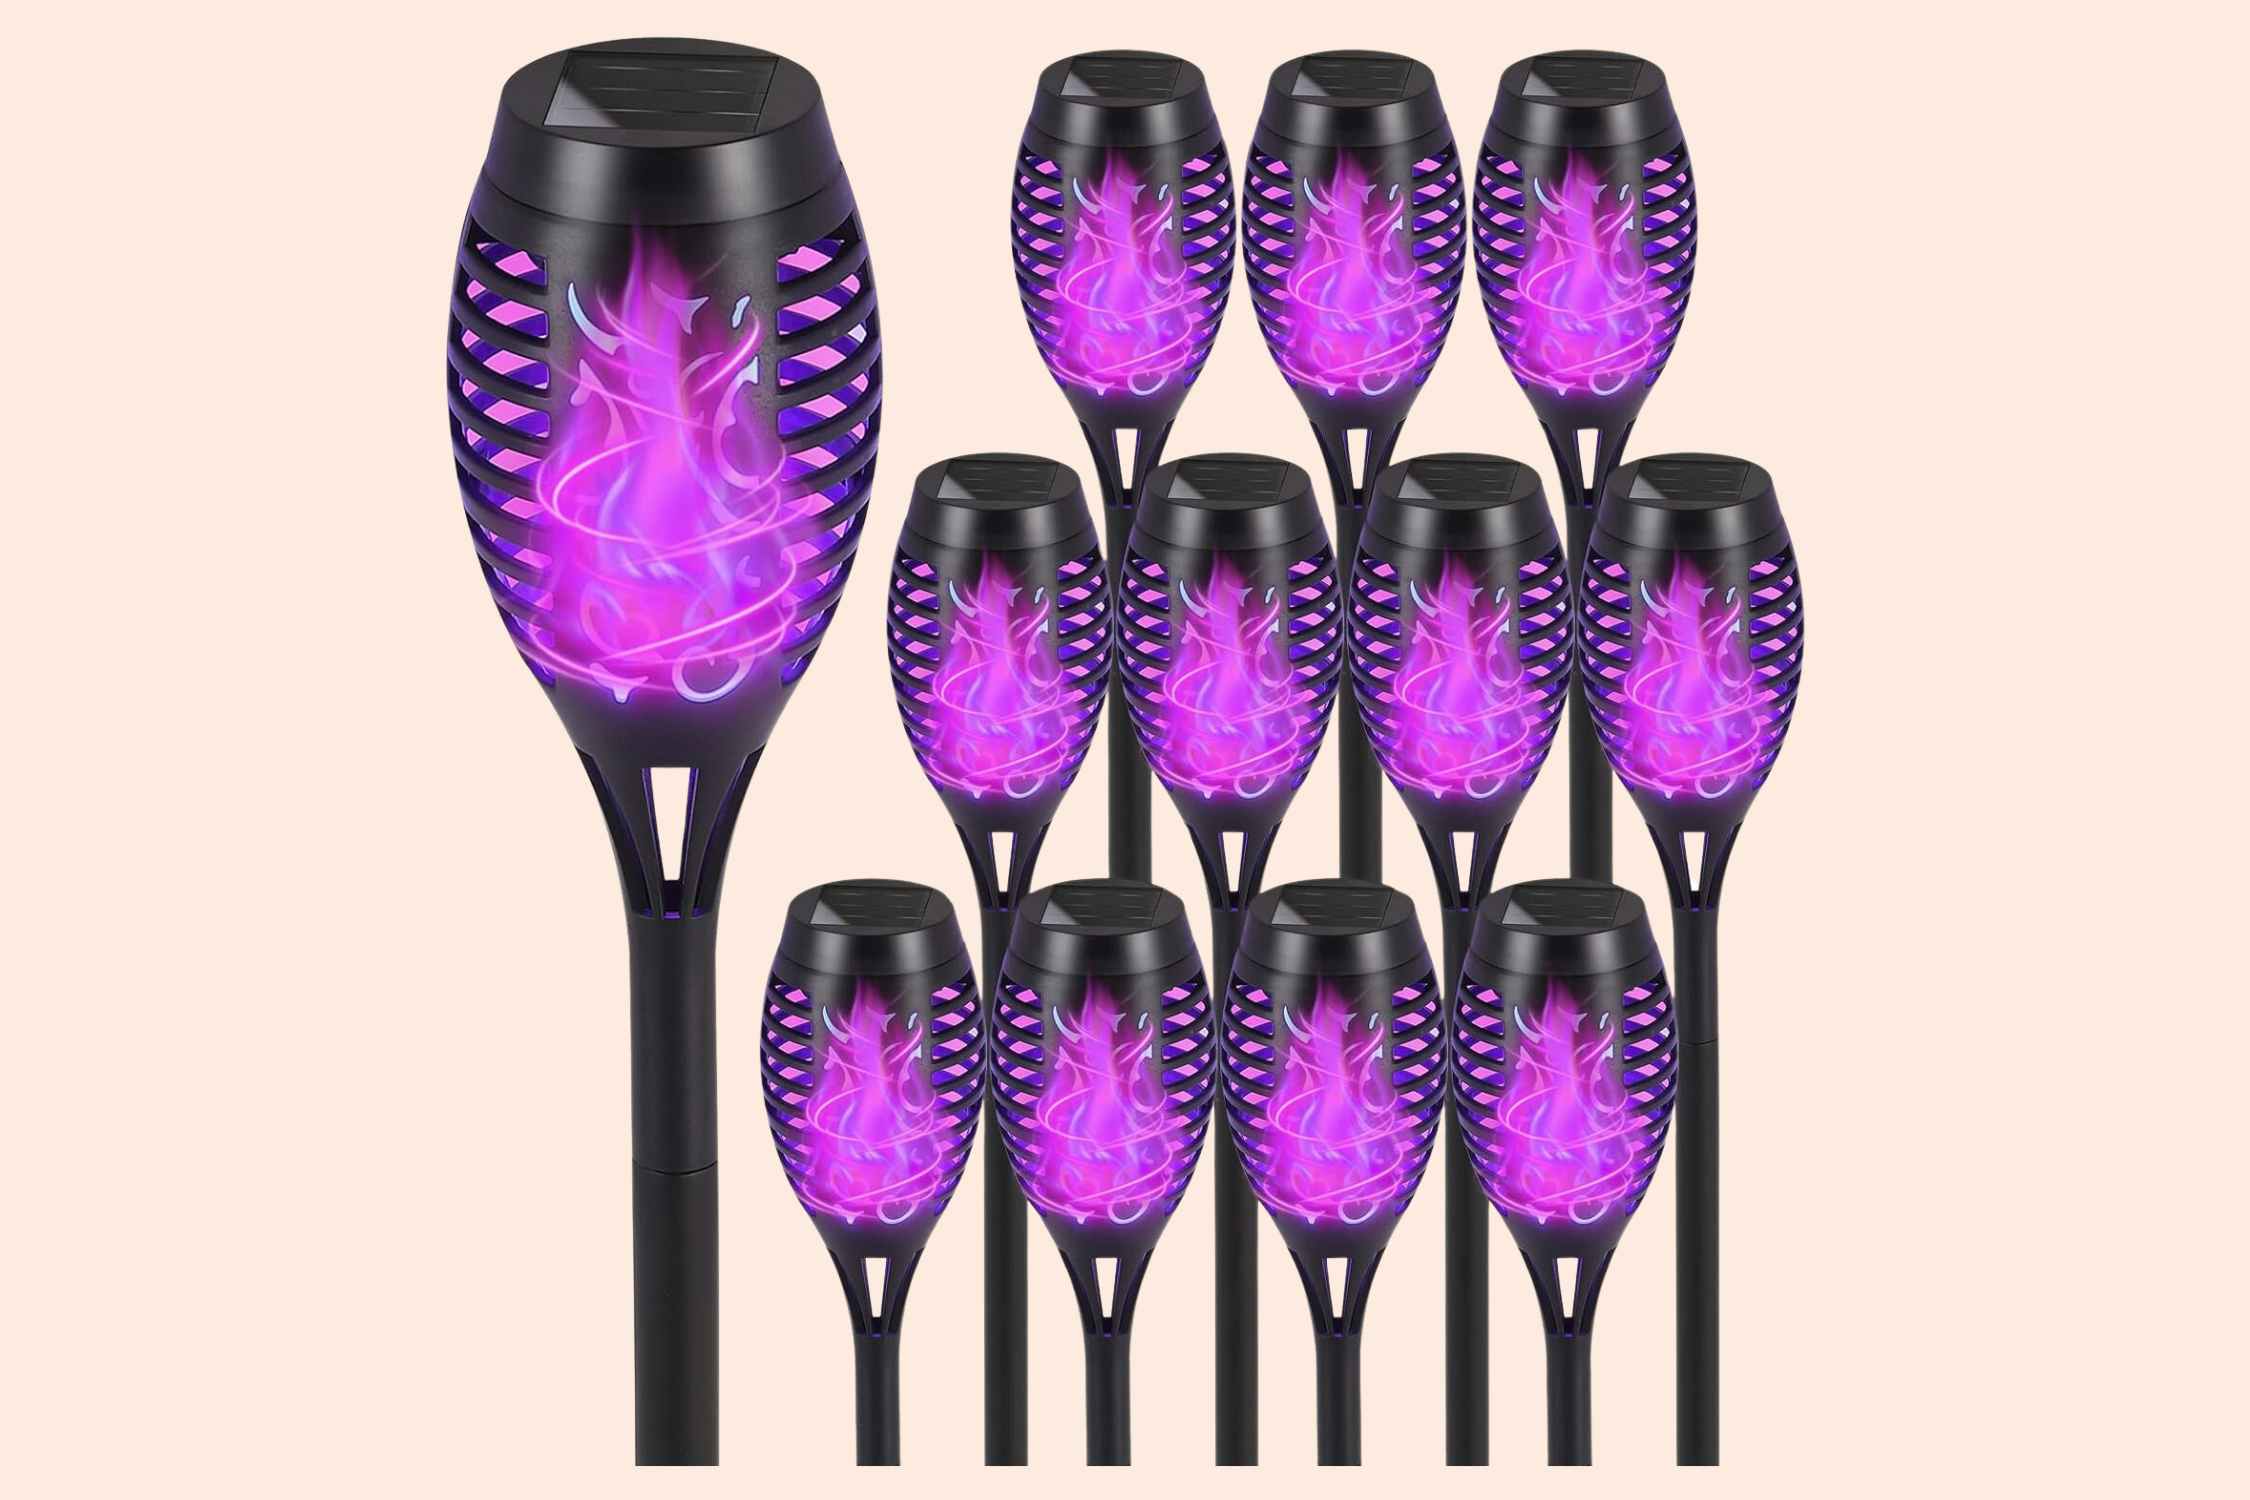 Flickering Flame Solar Outdoor Light 12-Pack, Just $25.49 on Amazon